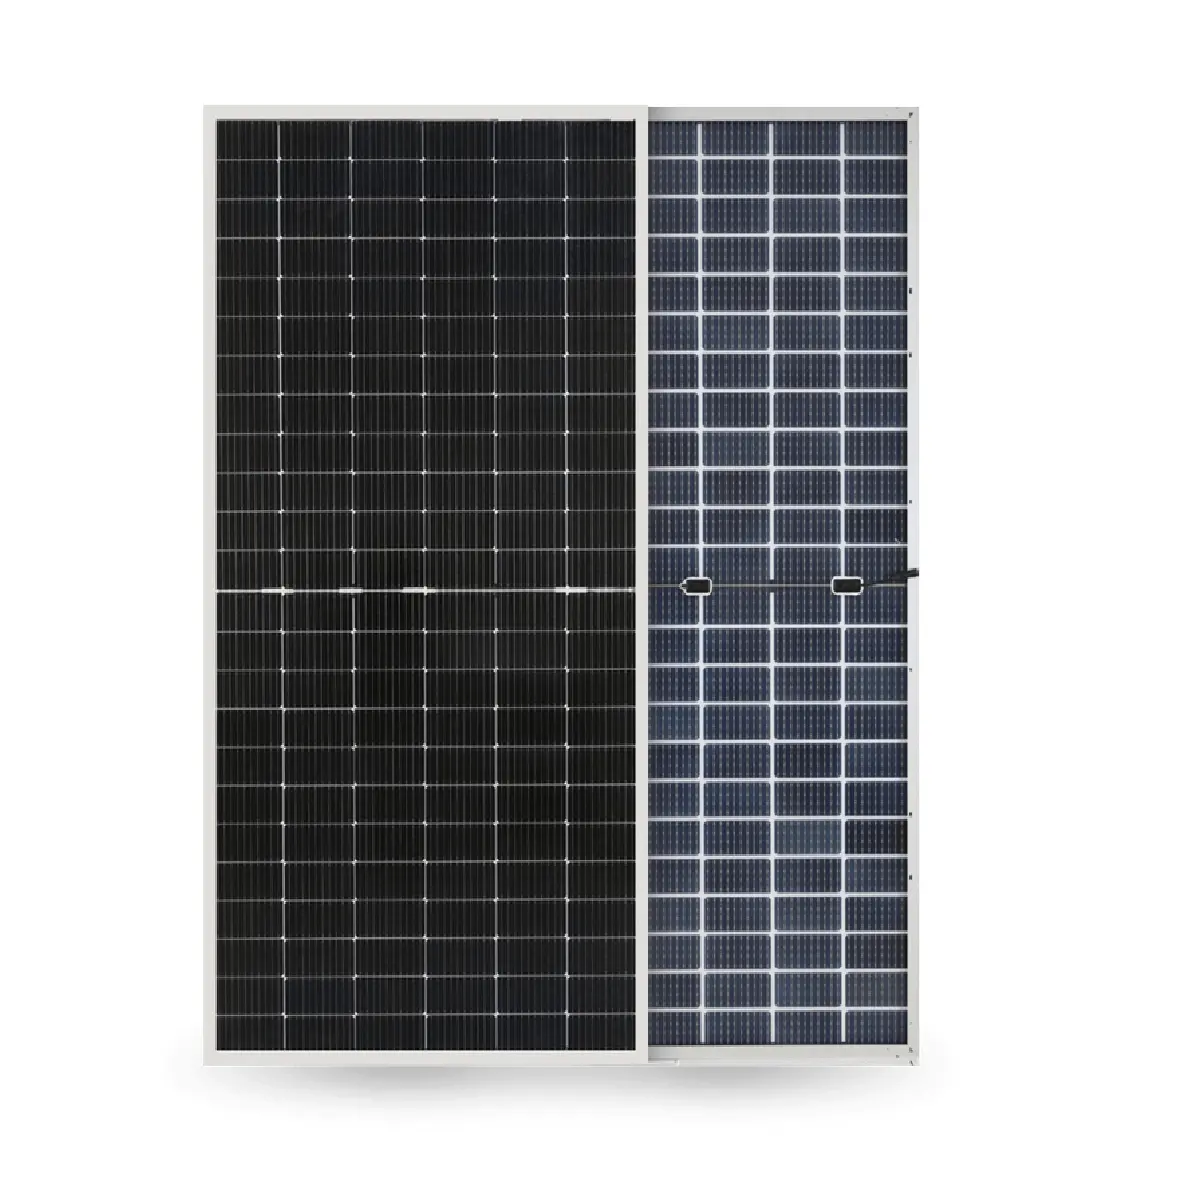 144 cell solar panel - What is the price of 144 cell solar panel